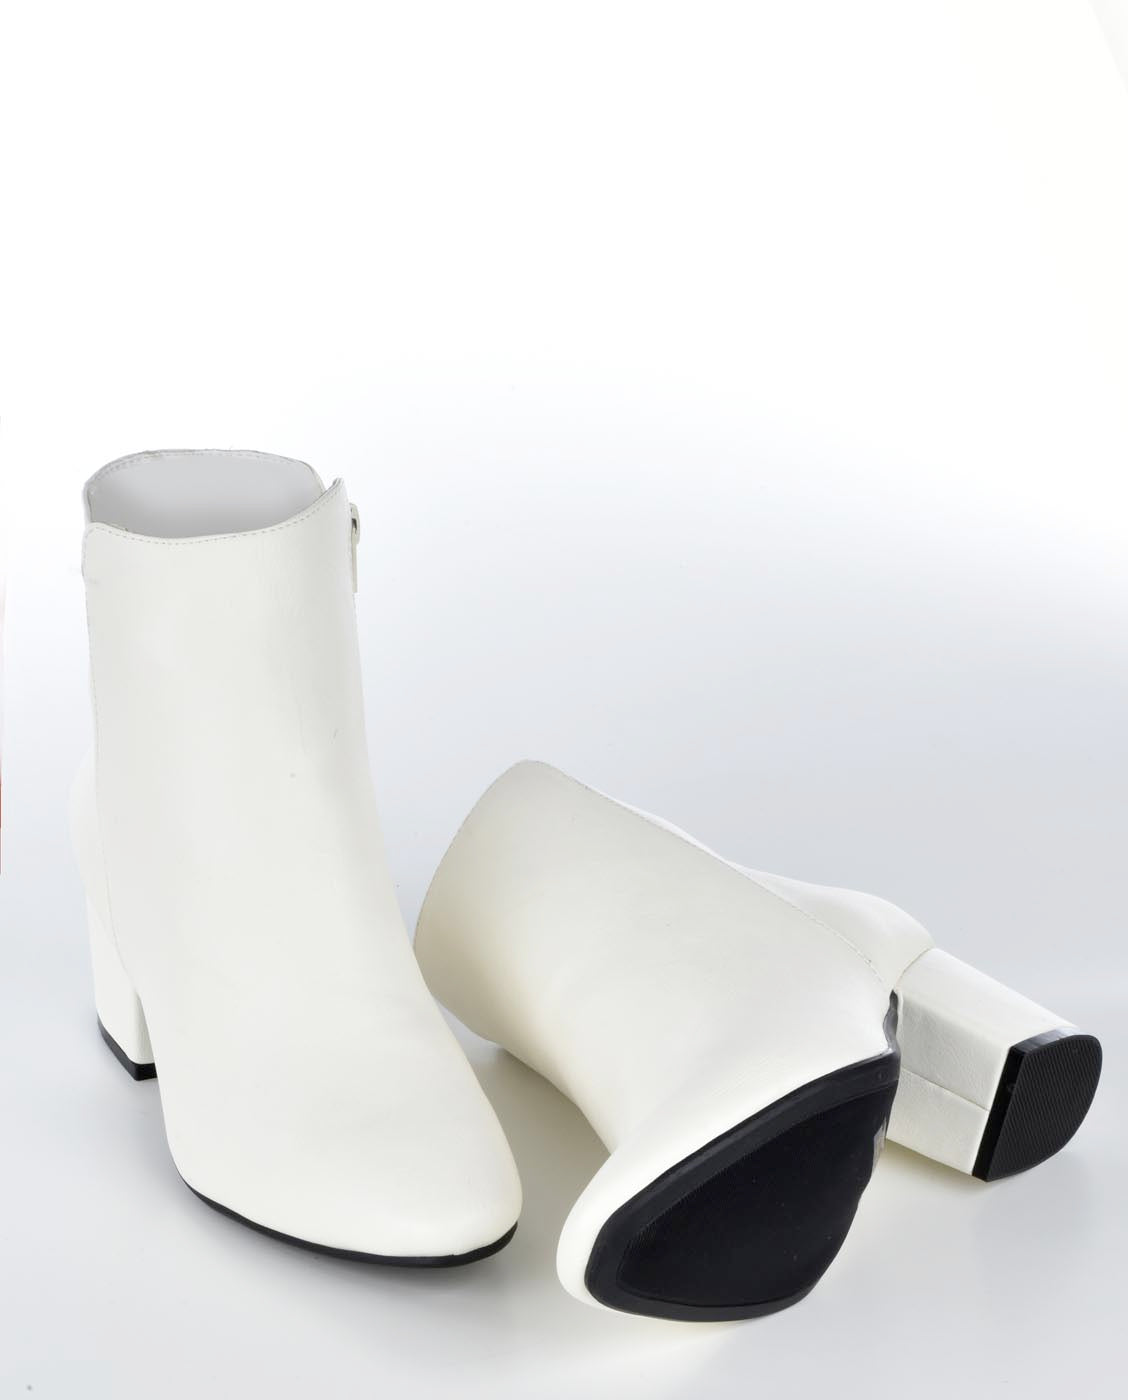 Faux Leather White Booties - Fashion You Up